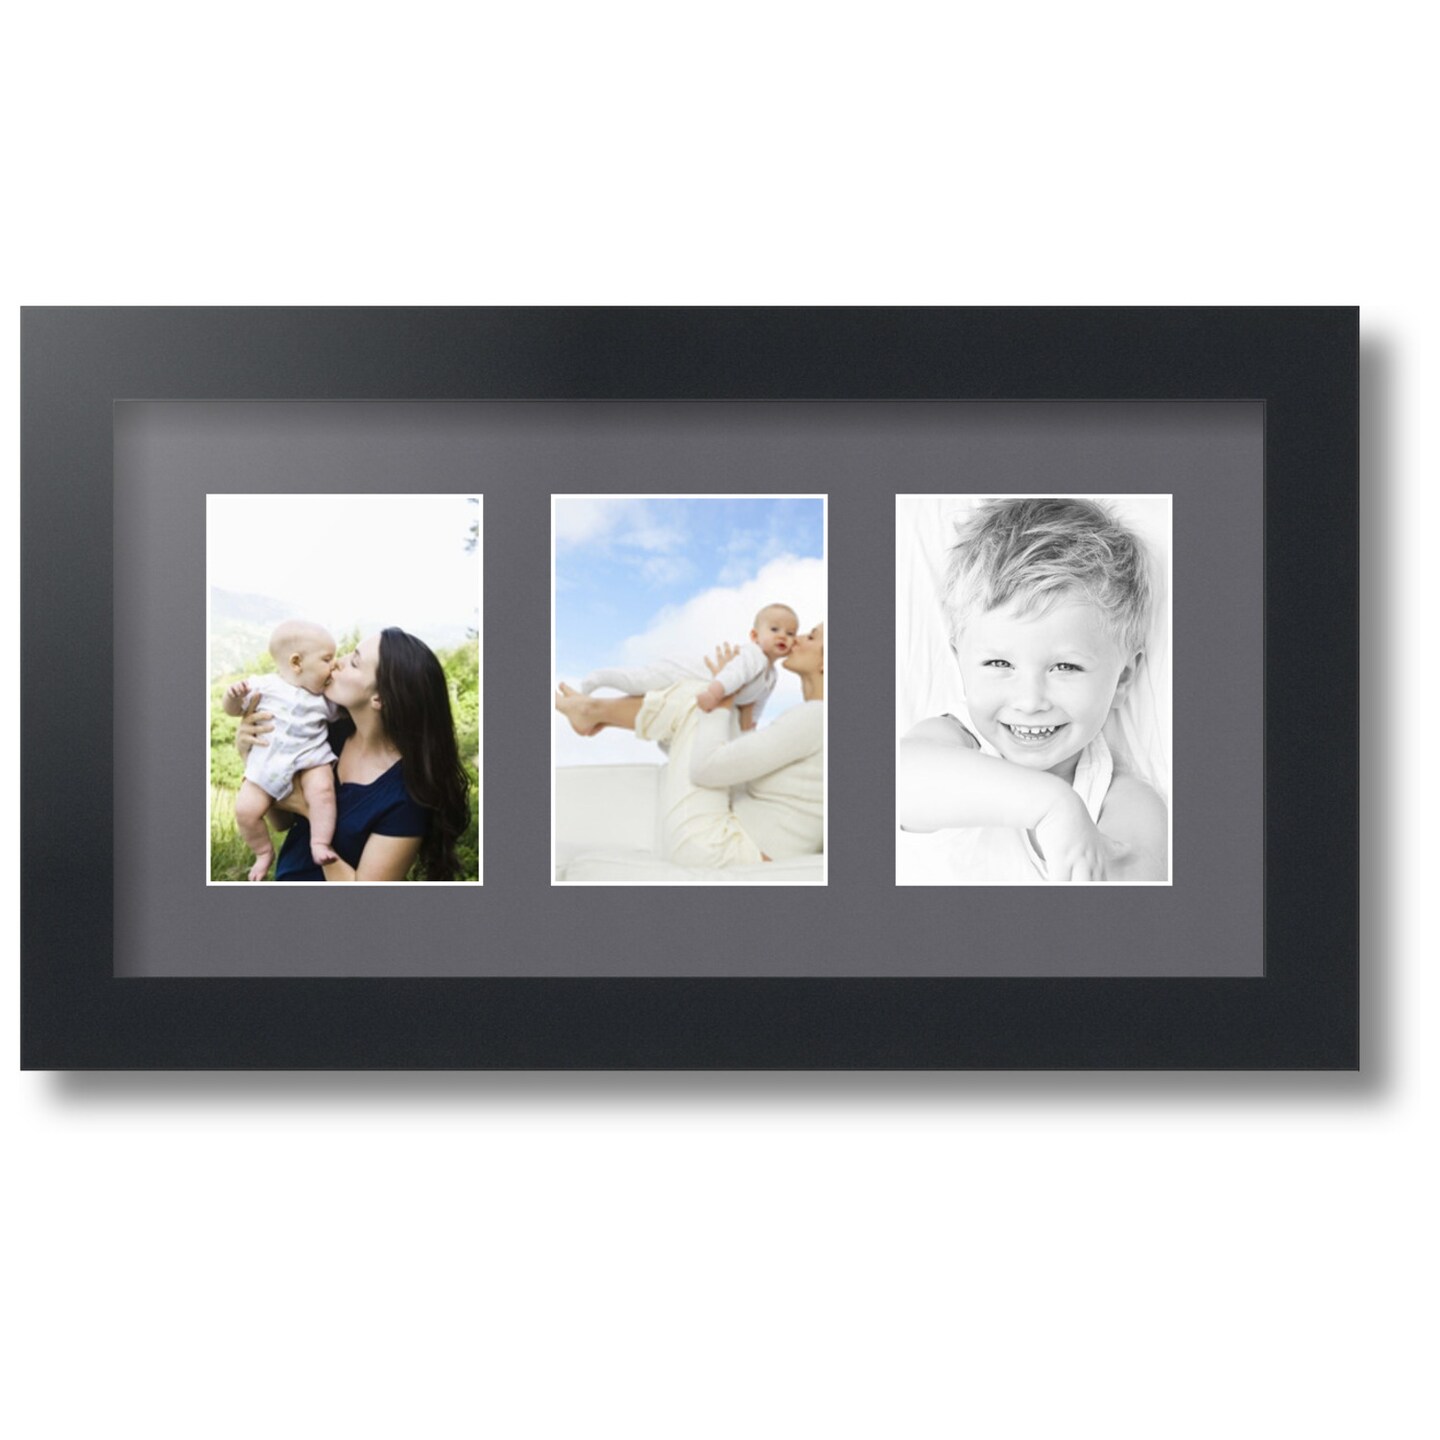 ArtToFrames Collage Photo Picture Frame with 3 - 3.5x5 inch Openings, Framed in Black with Over 62 Mat Color Options and Regular Glass (CSM-3926-29)